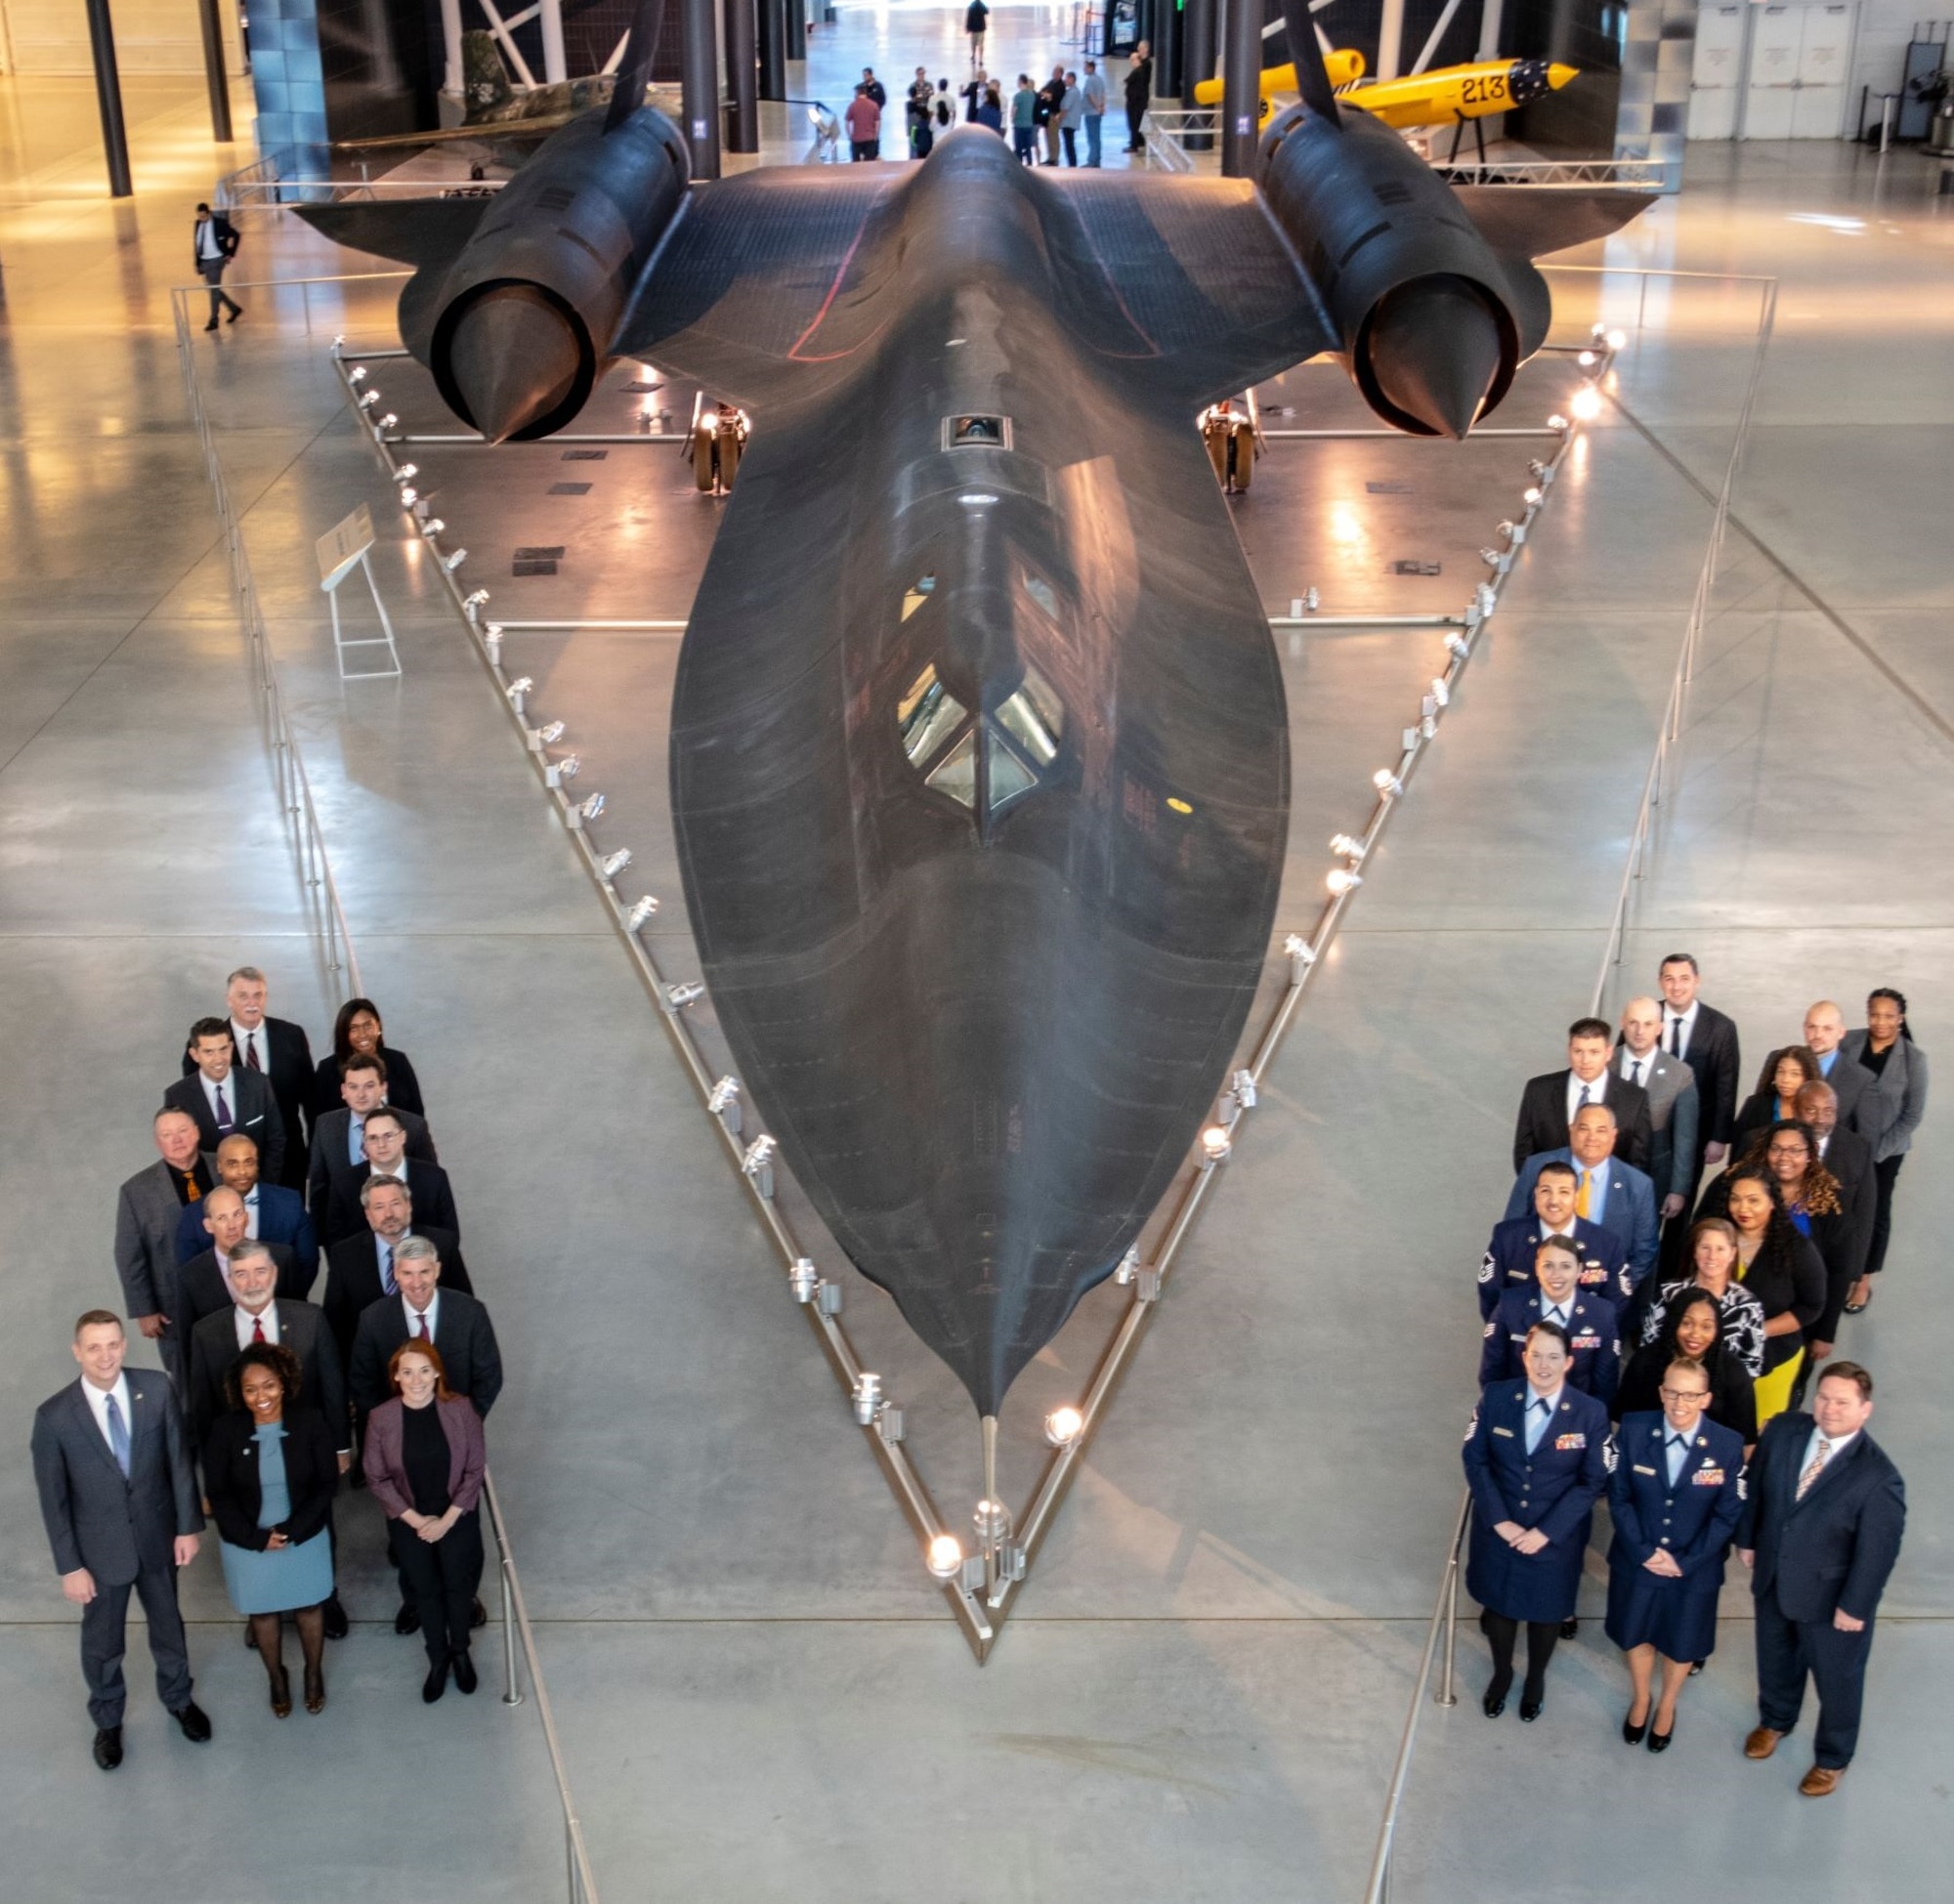 Mr. Terry Phillips, lower right front row, the Executive Director, OSI Office of Special Projects (PJ) and United States Air Force and Space Force Special Access Program Security Director, is joined by fellow PJ members framing a displayed SR-71 Blackbird reconnaissance aircraft. (PJ courtesy photo)